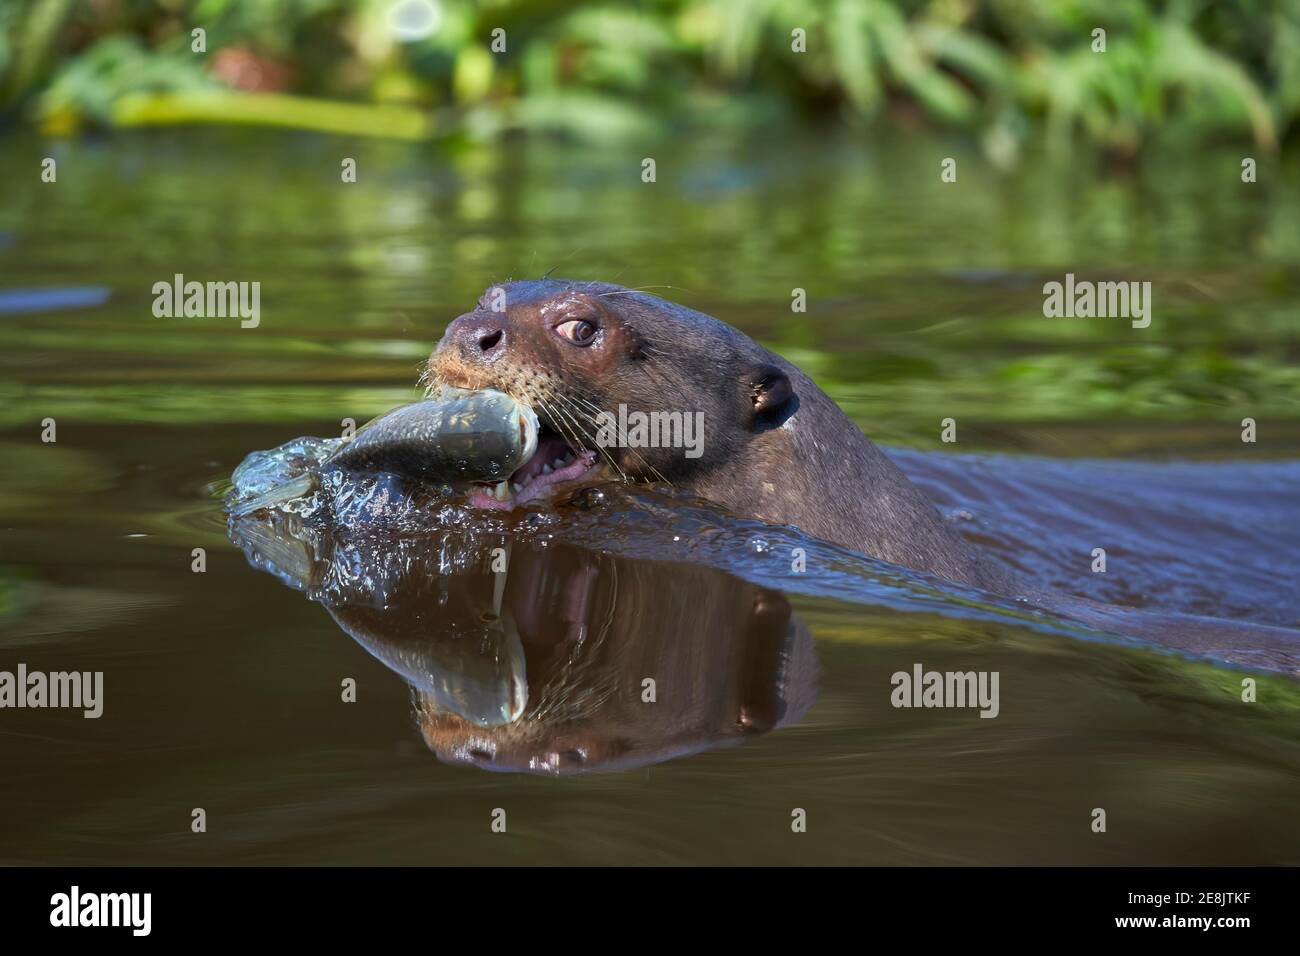 Giant otter (Pteronura brasiliensis) with captured fish and water reflection in the Rio Cuiaba, Mato Grosso do Sul, Pantanal, Brazil Stock Photo